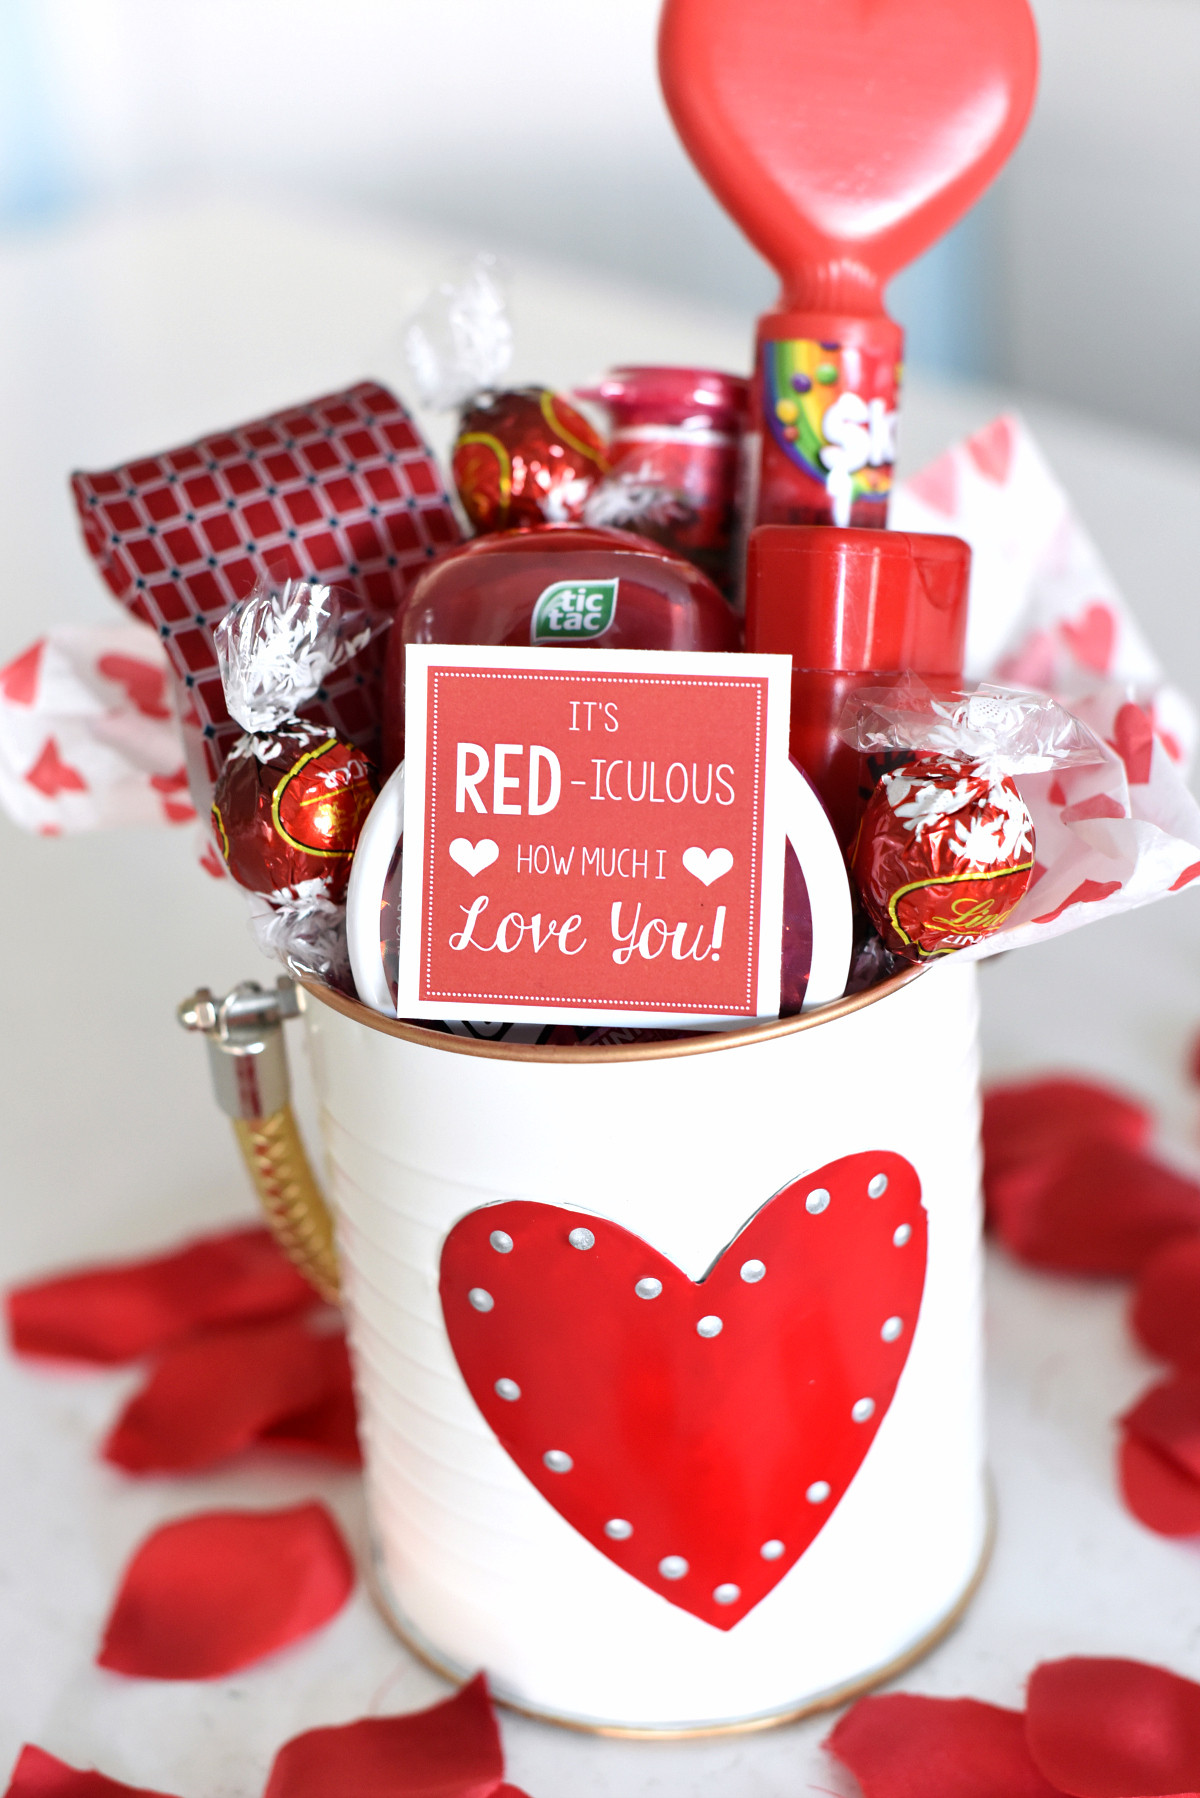 Cute Valentine Gift Ideas For Him
 Cute Valentine s Day Gift Idea RED iculous Basket